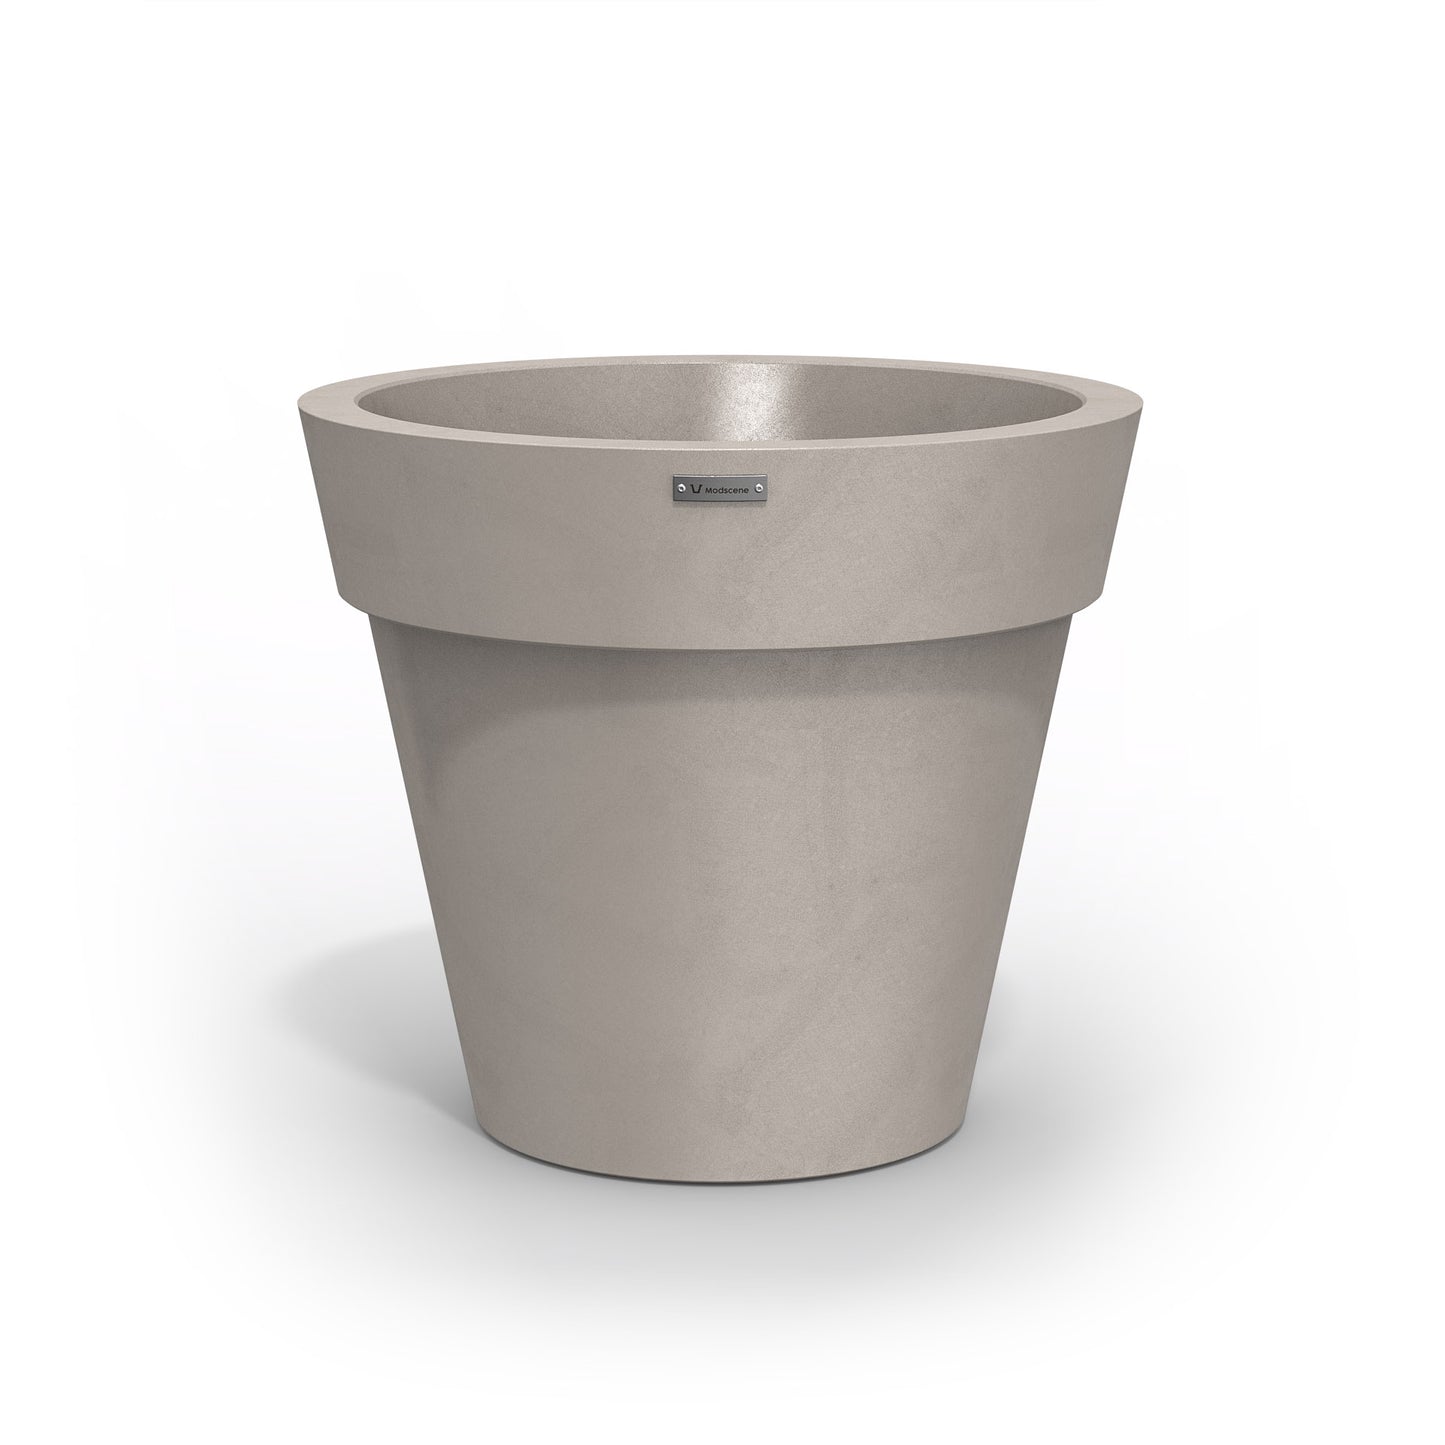 A Modscene plastic planter pot made in a sandstone colour with a concrete look.